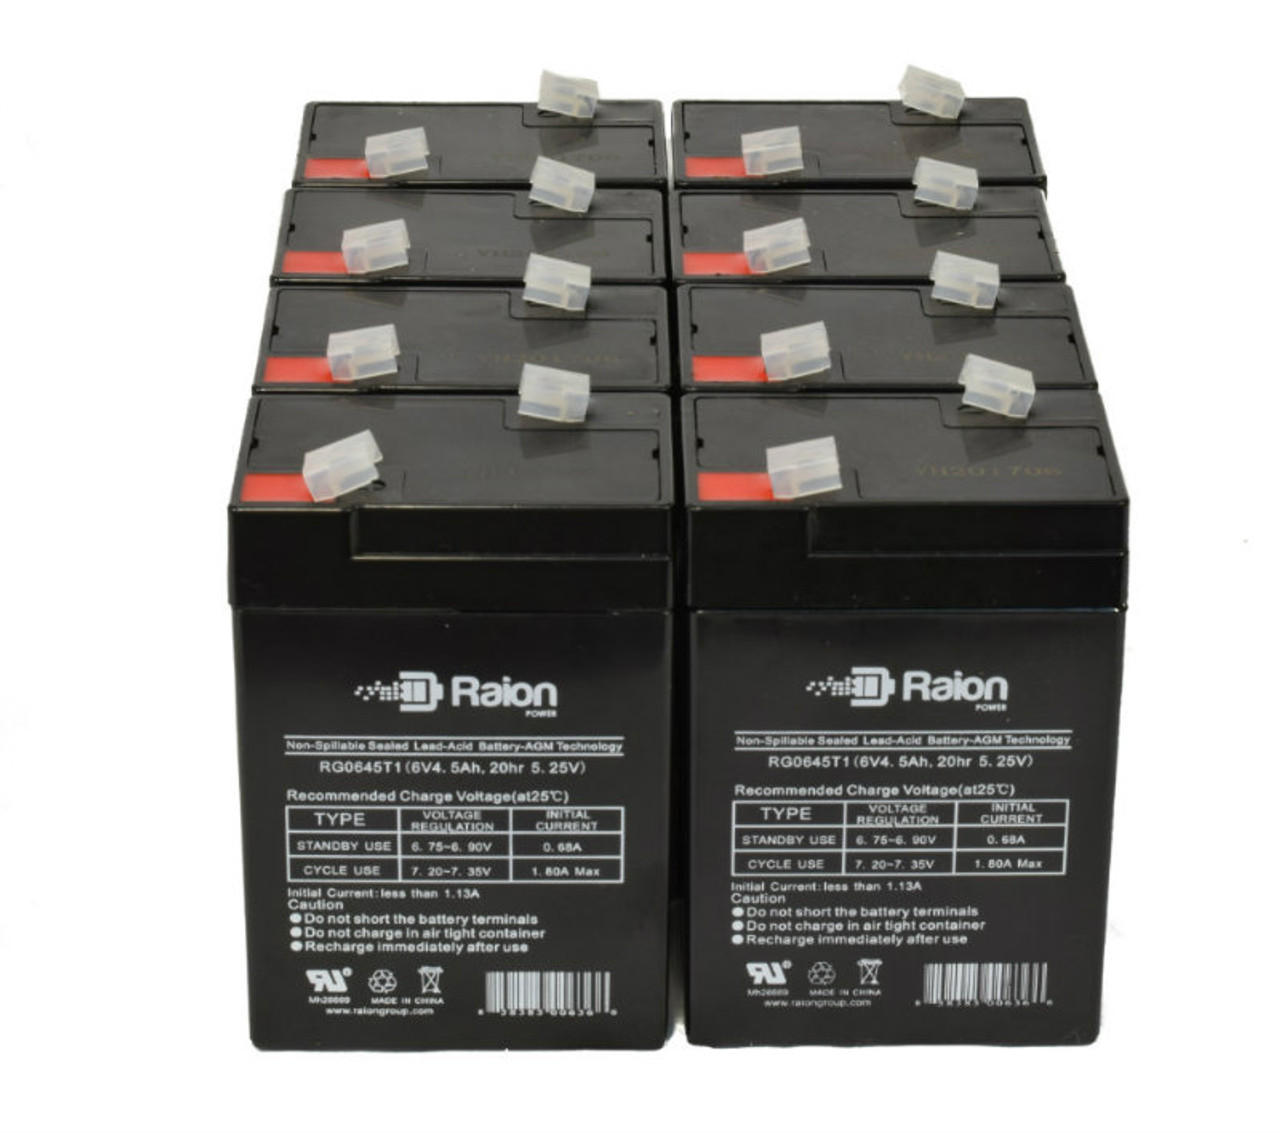 Raion Power 6 Volt 4.5Ah RG0645T1 Replacement Battery for MCA NP4-6CUT - 8 Pack